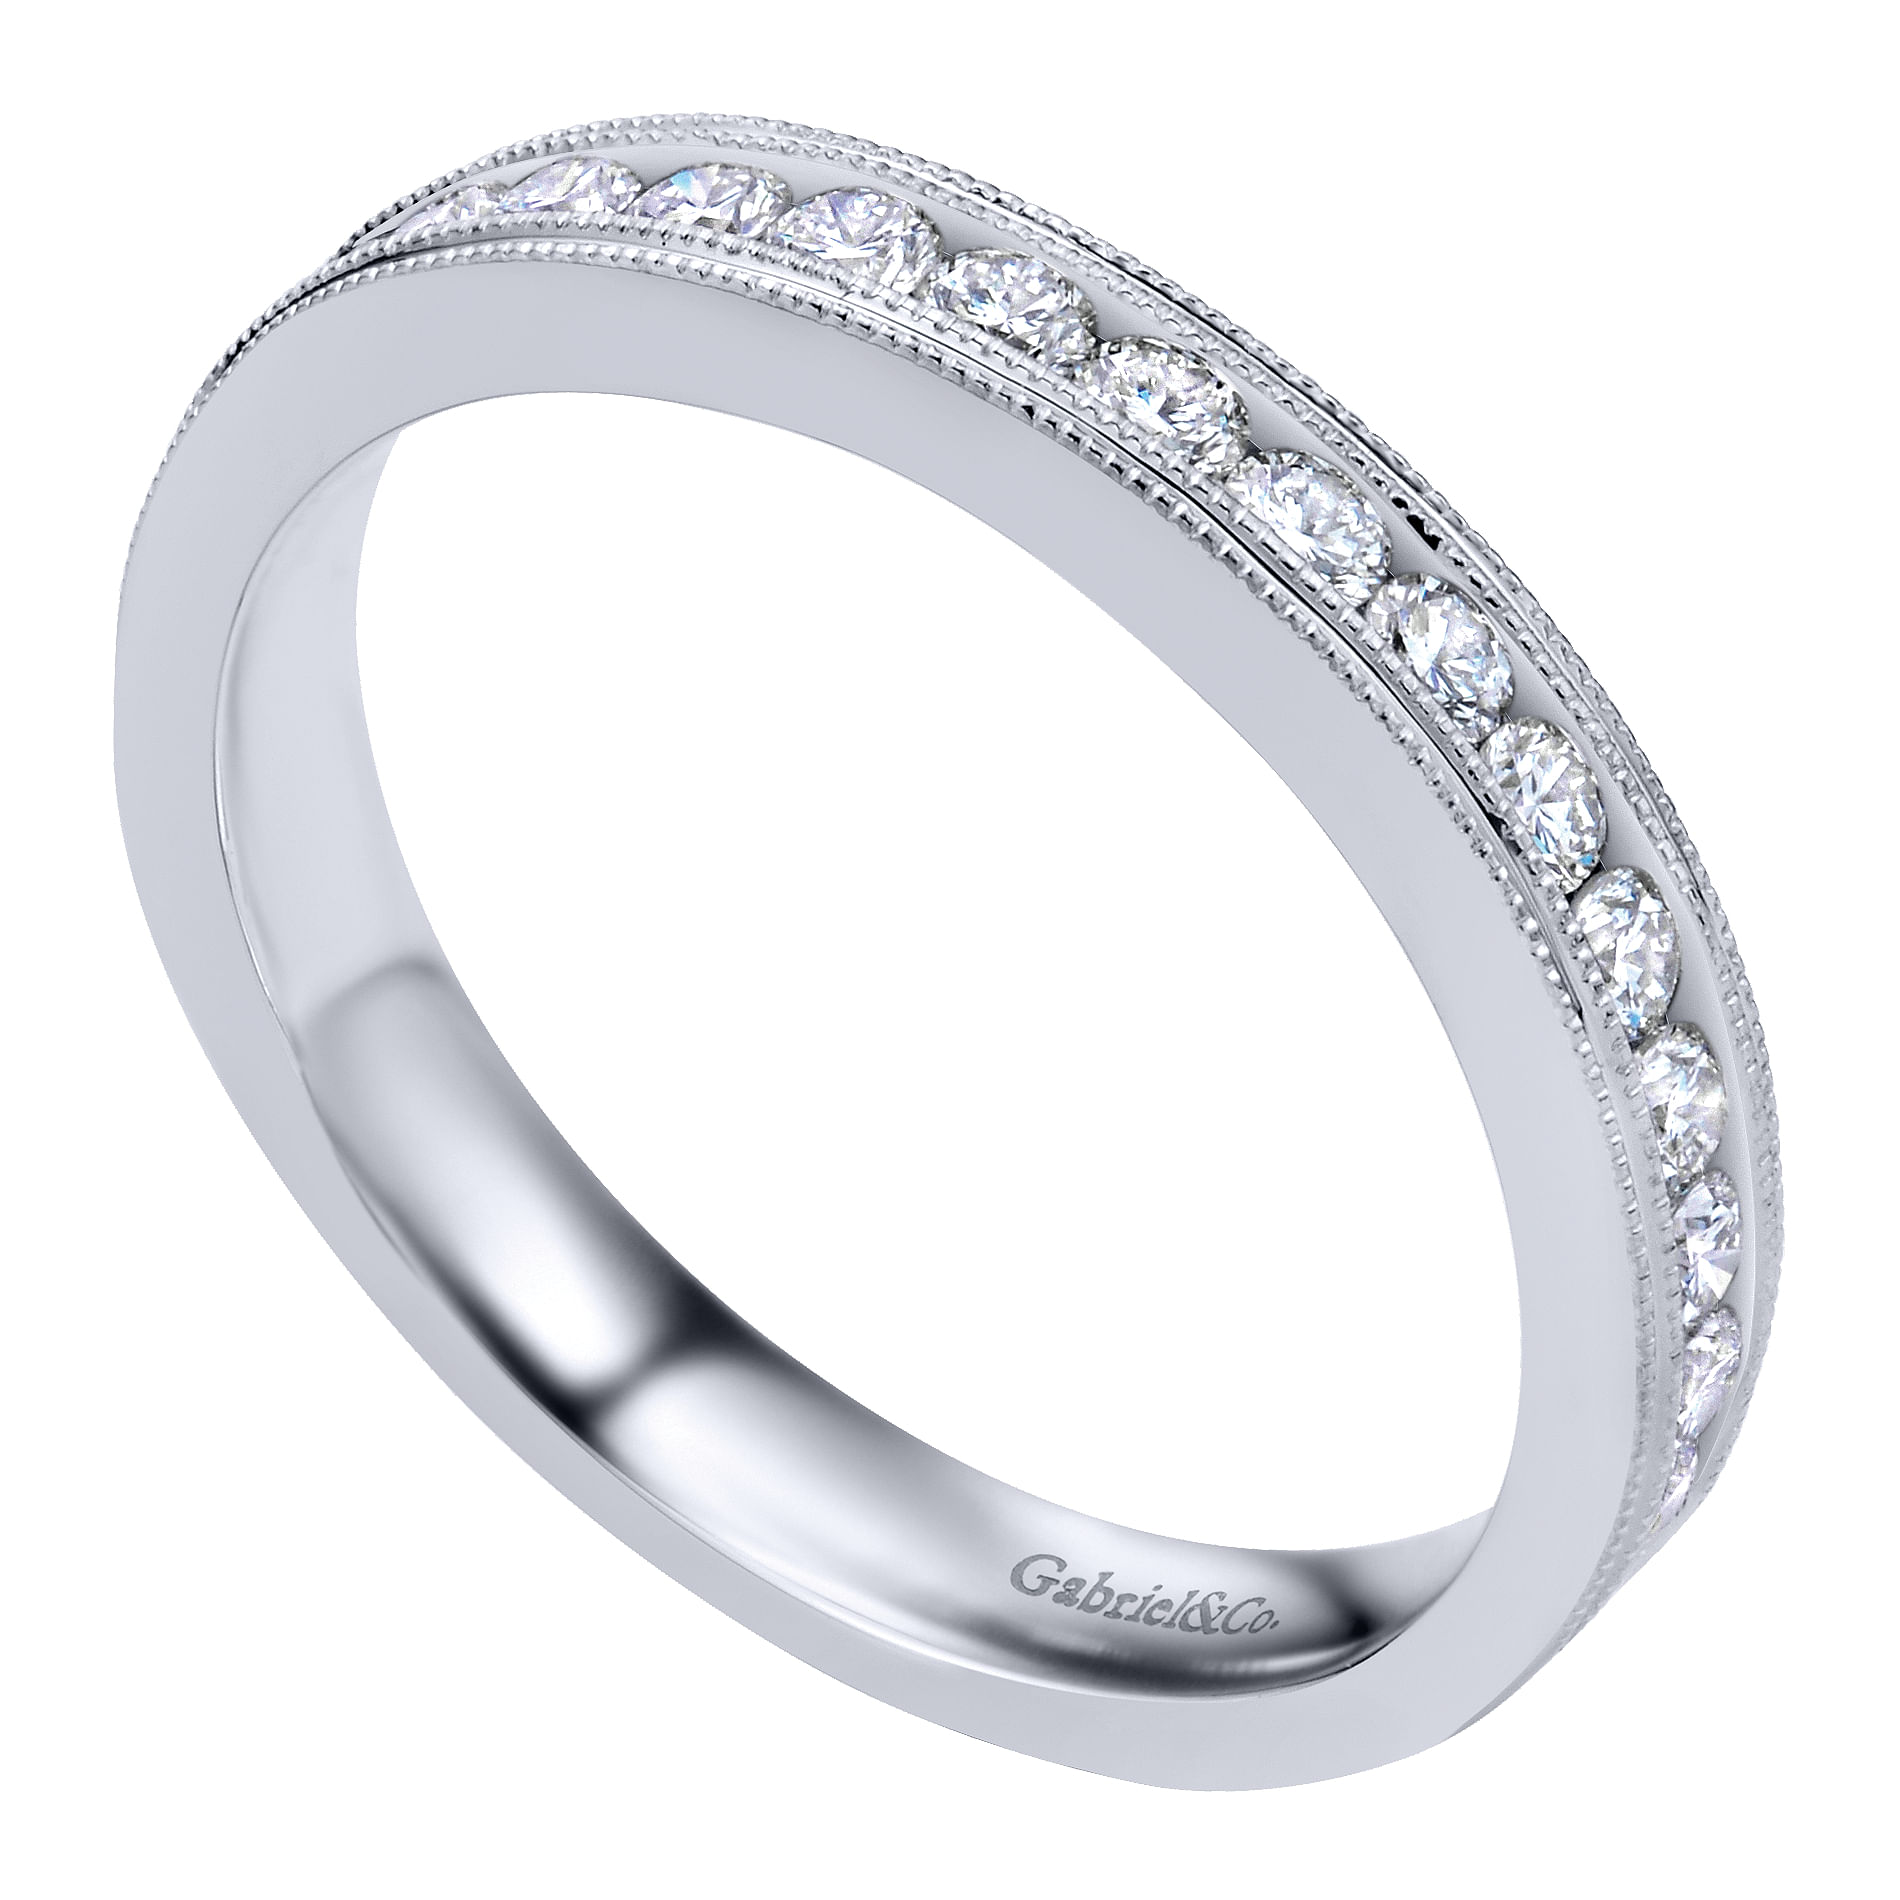 Macao - Vintage Inspired 14K White Gold Channel Set Diamond Anniversary Band - 0.5 ct - Shot 3